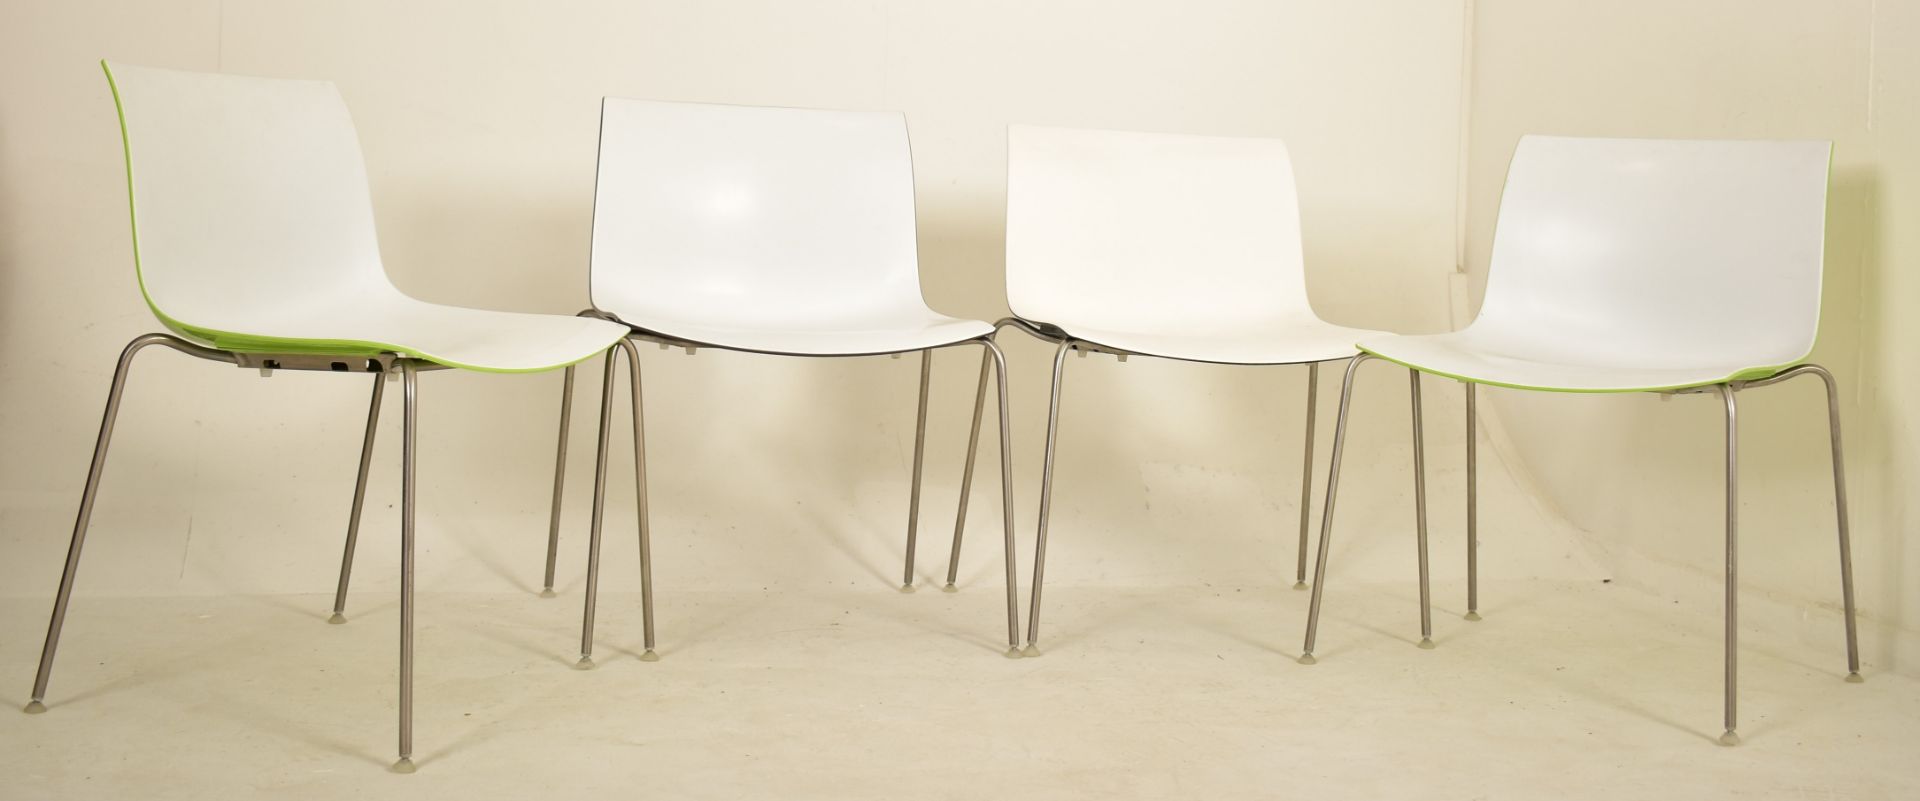 LIEVORE MOLINA X ARPER - CATIFA 46 - SEVEN STACKING CHAIRS - Image 3 of 6